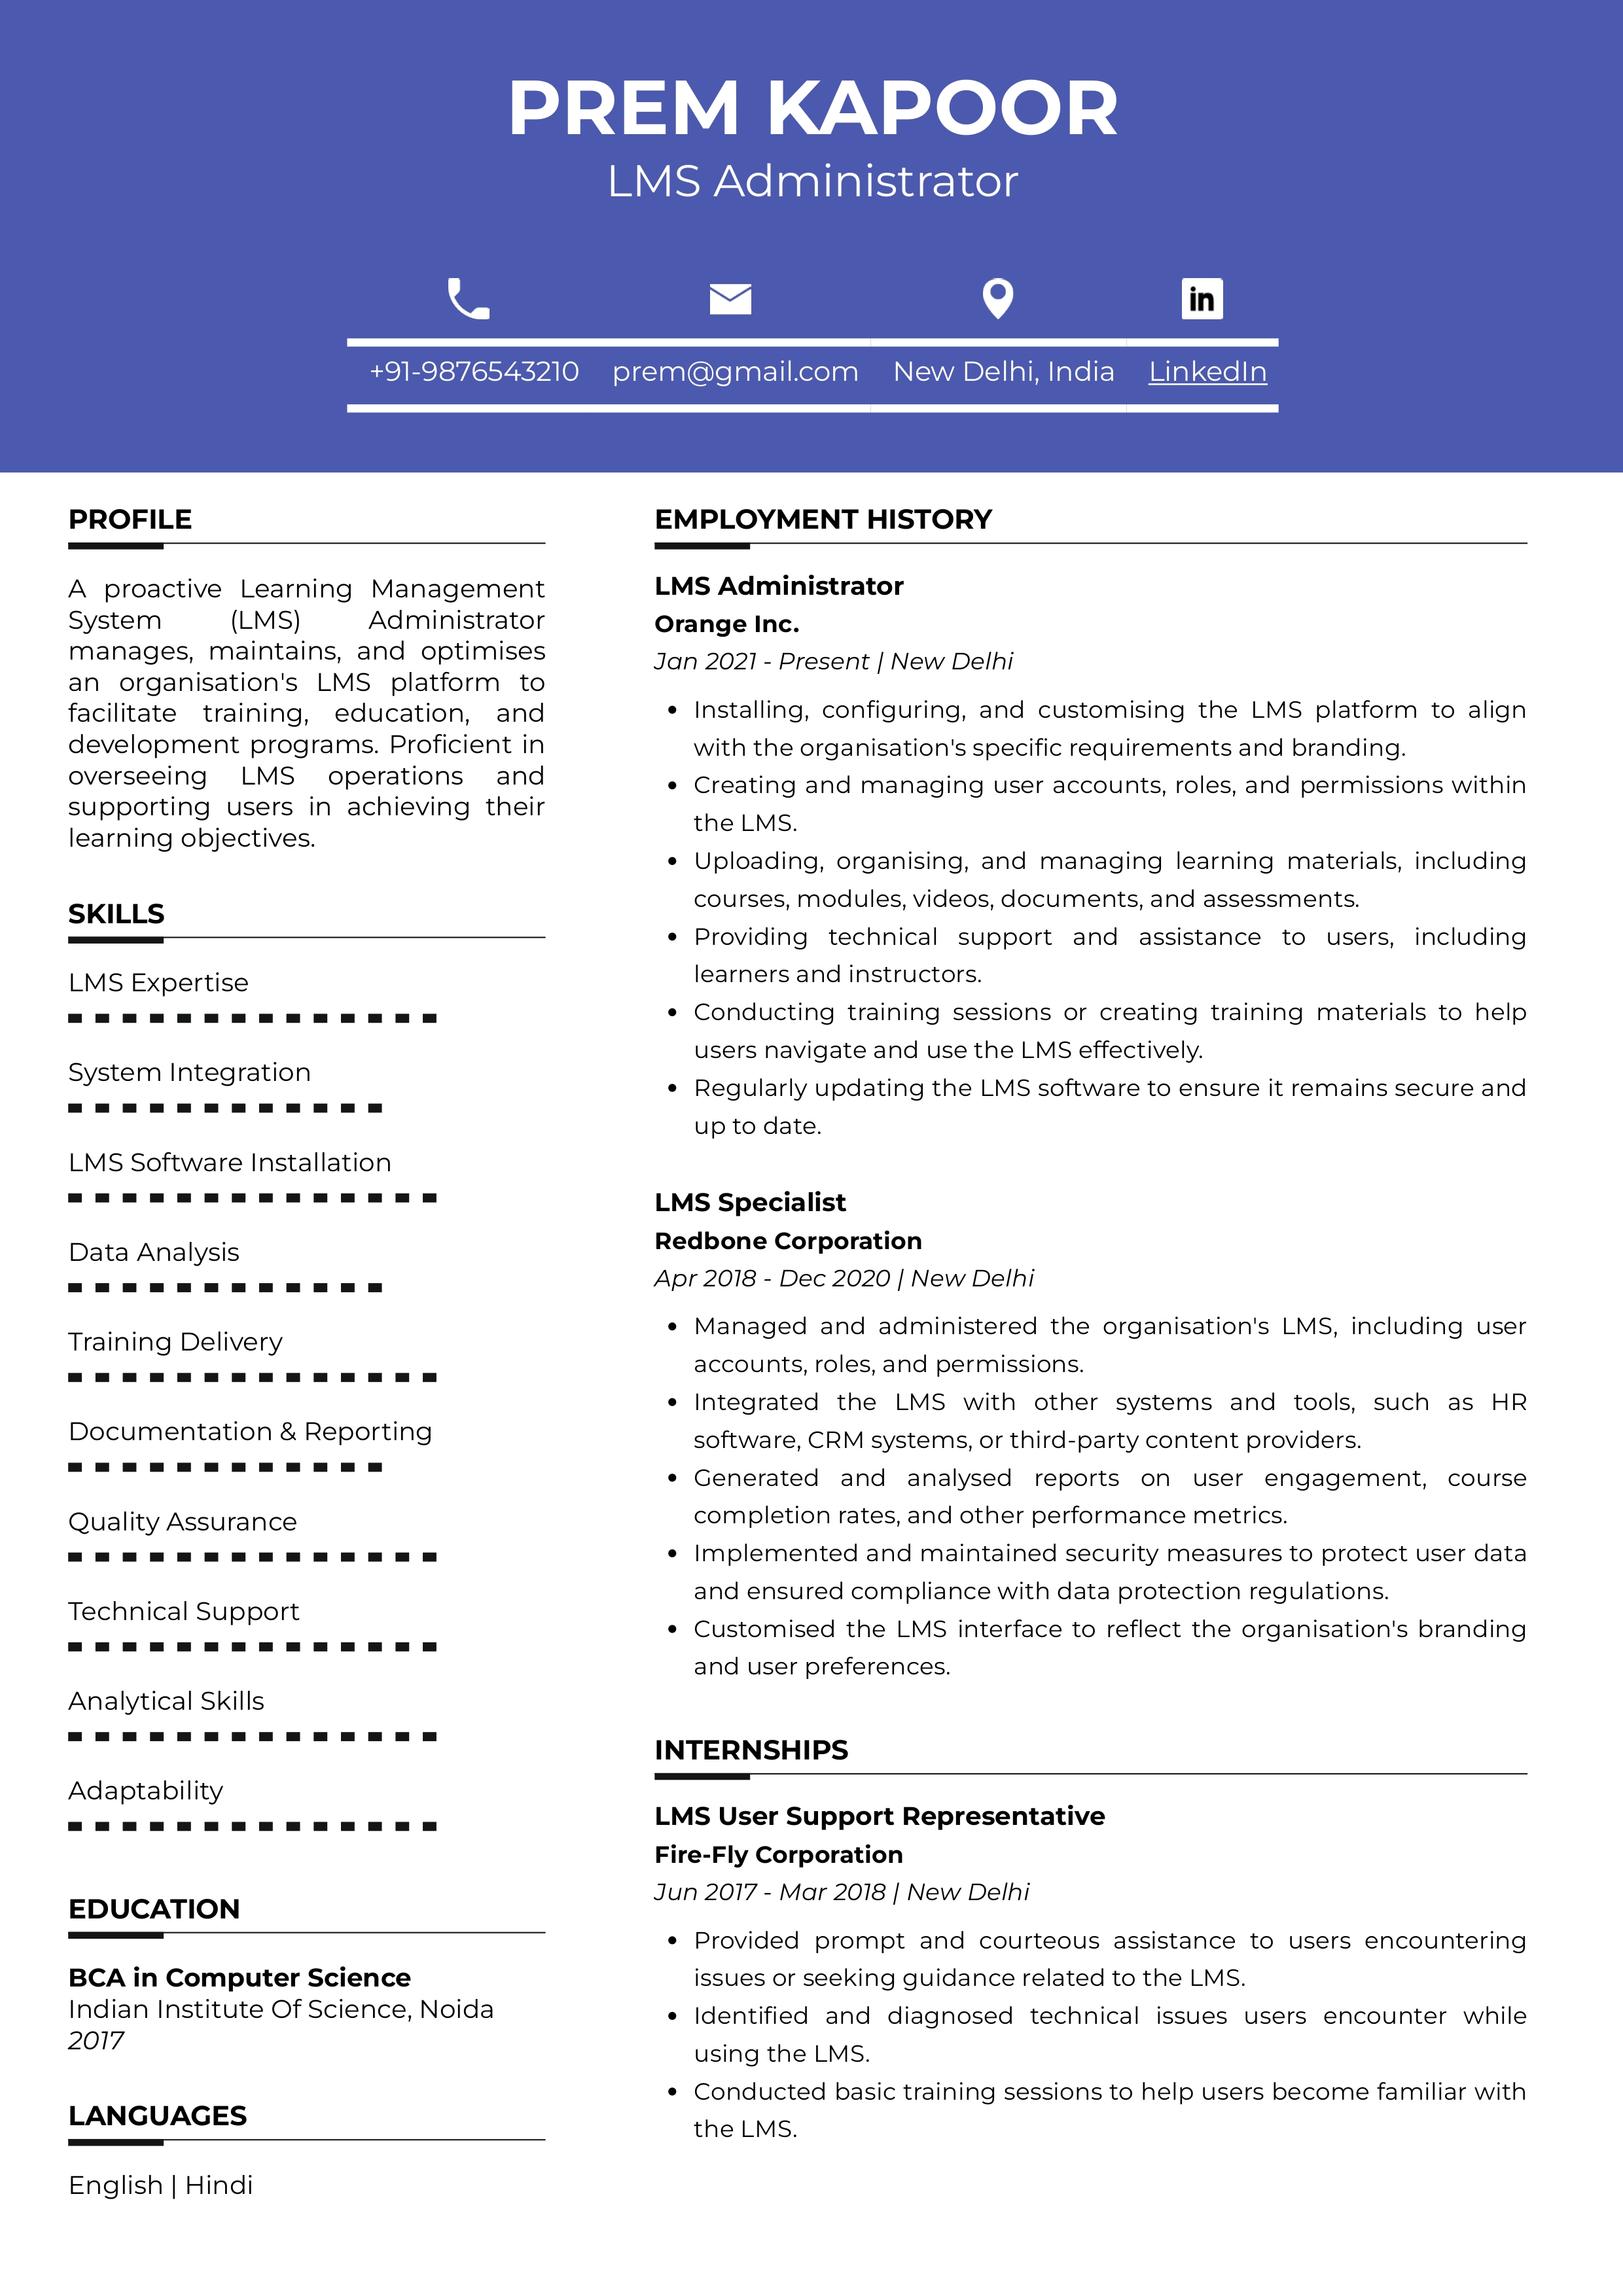 Sample Resume of LMS Administrator | Free Resume Templates & Samples on Resumod.co